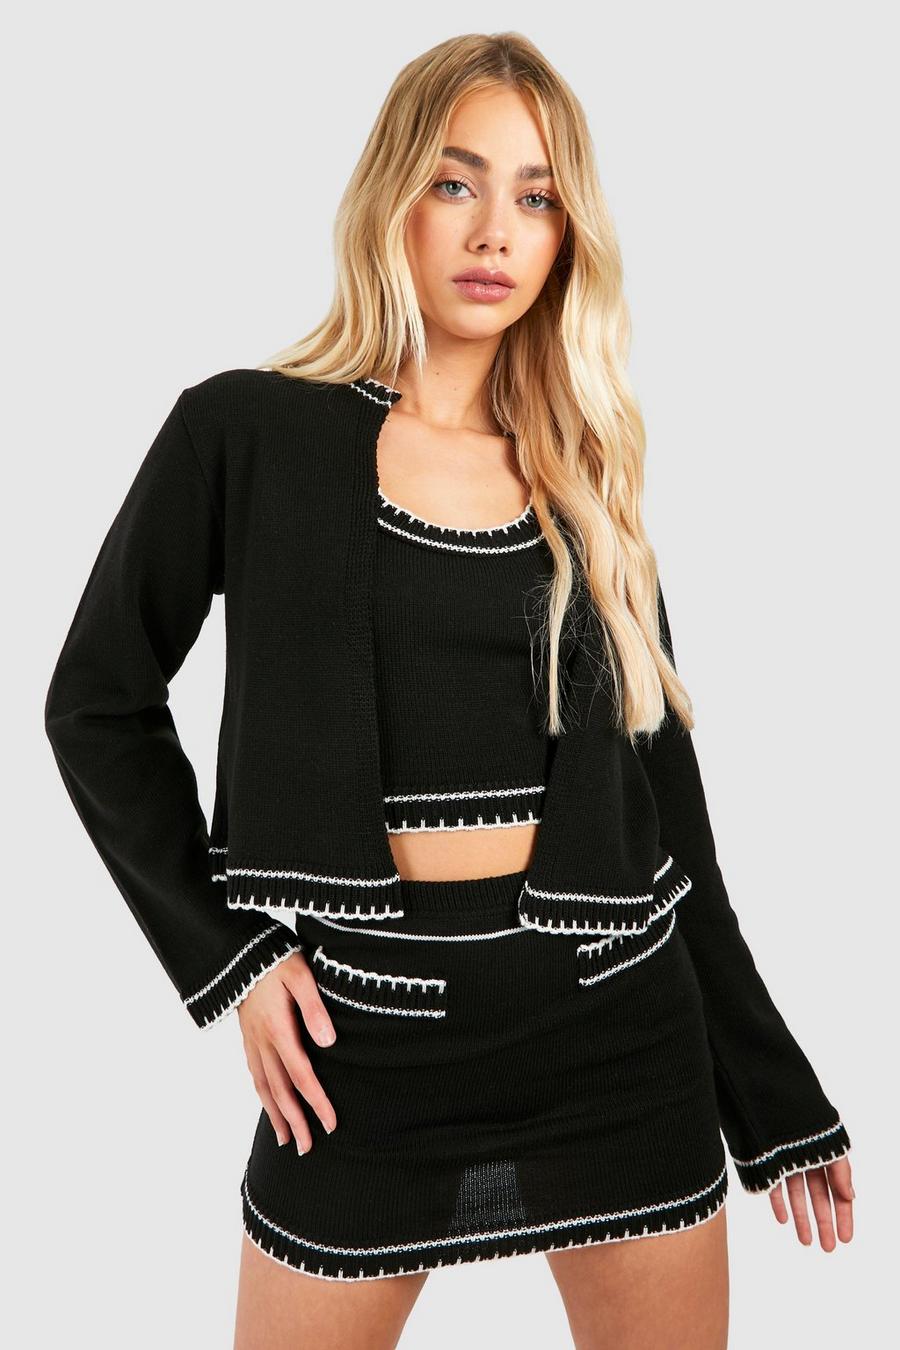 Black Ombre Crochet Long Sleeve Knitted Top